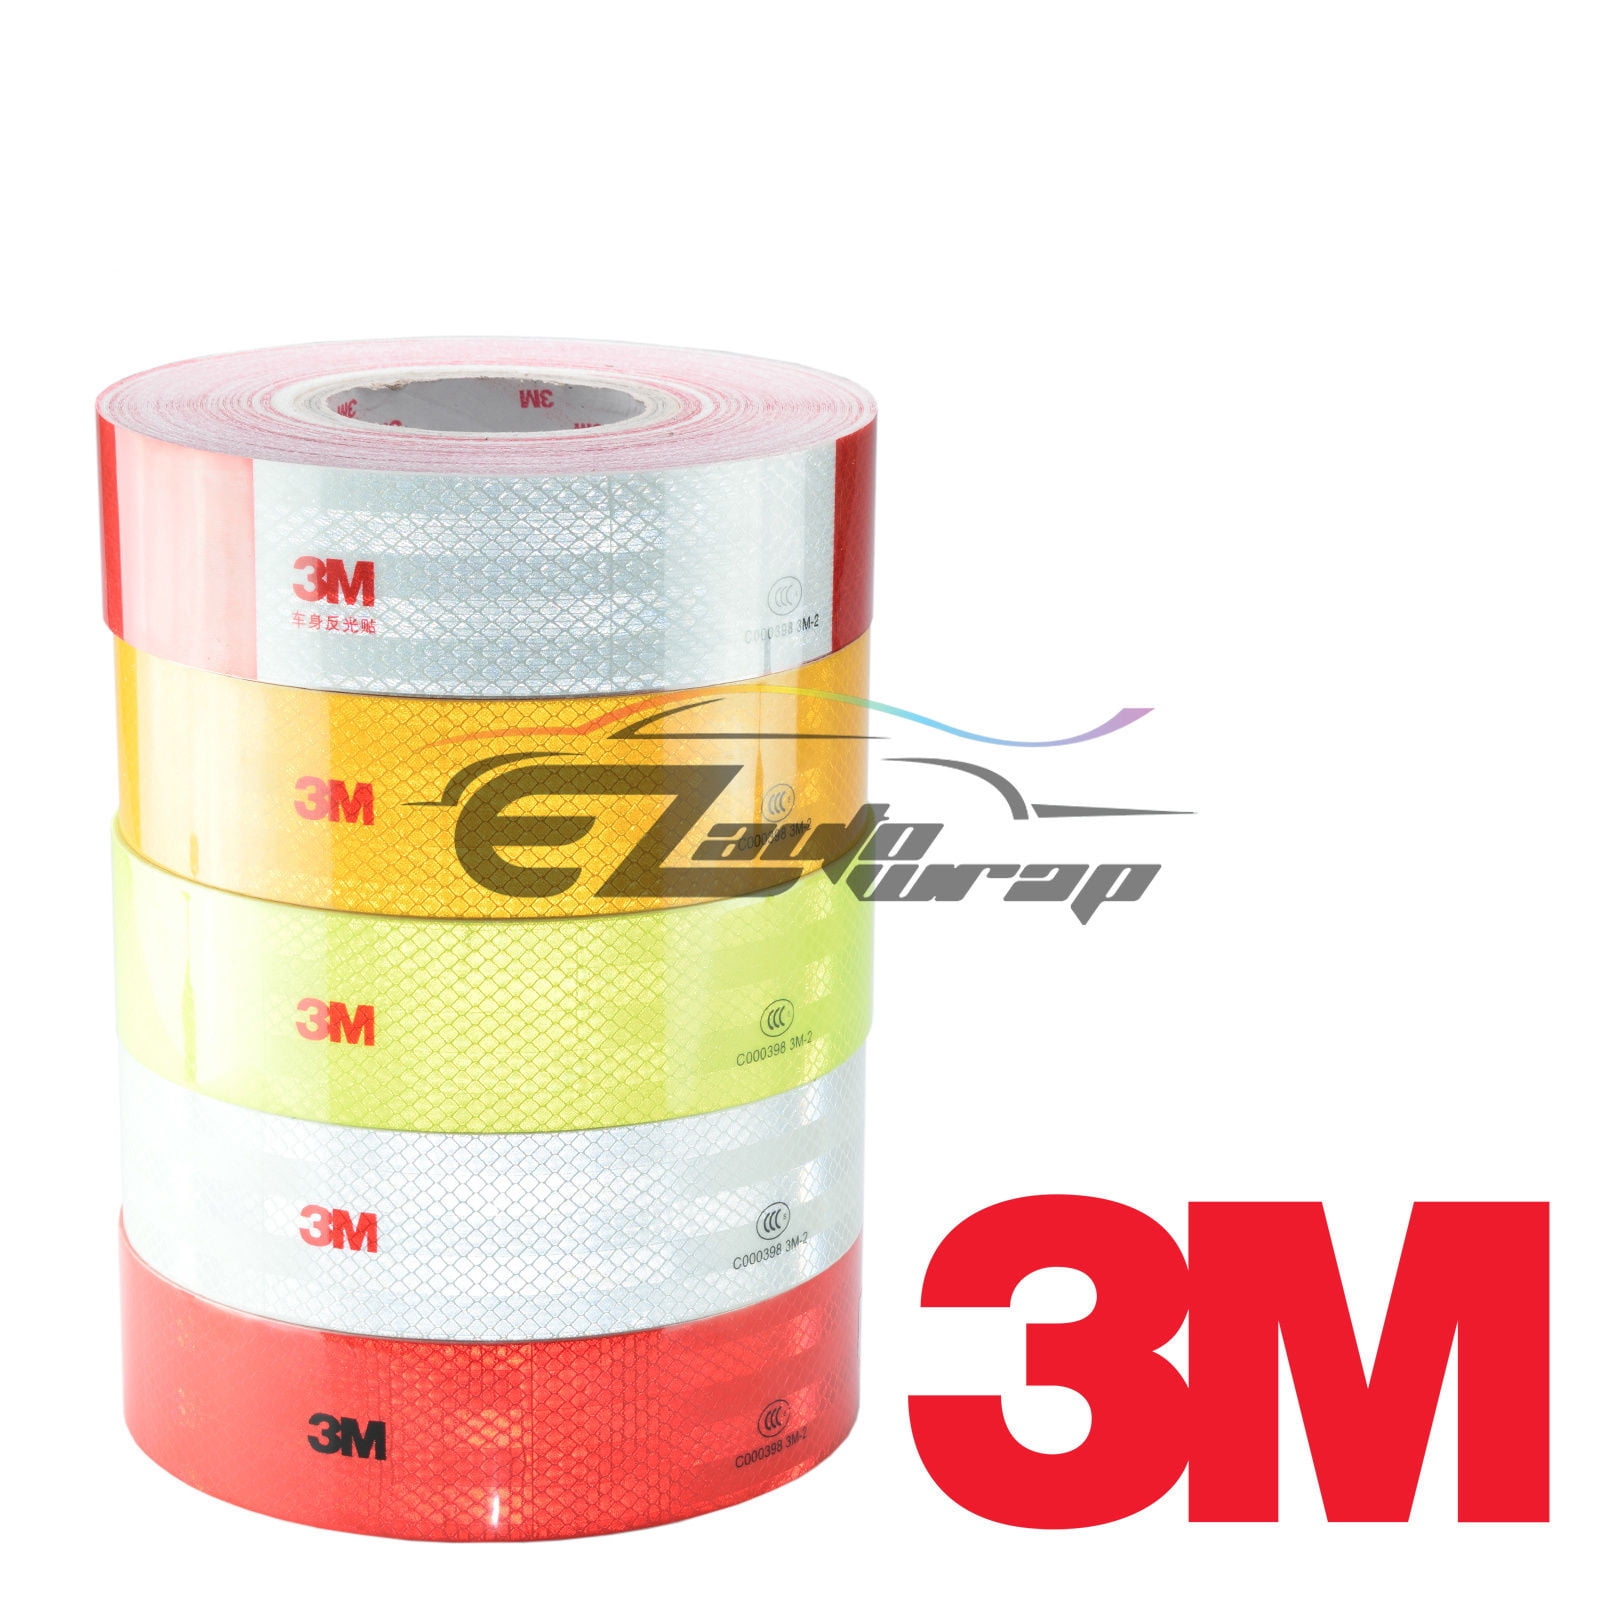 New Red White Arrows Reflective Safety Conspicuity Tape,2 Inch,3M/lot 